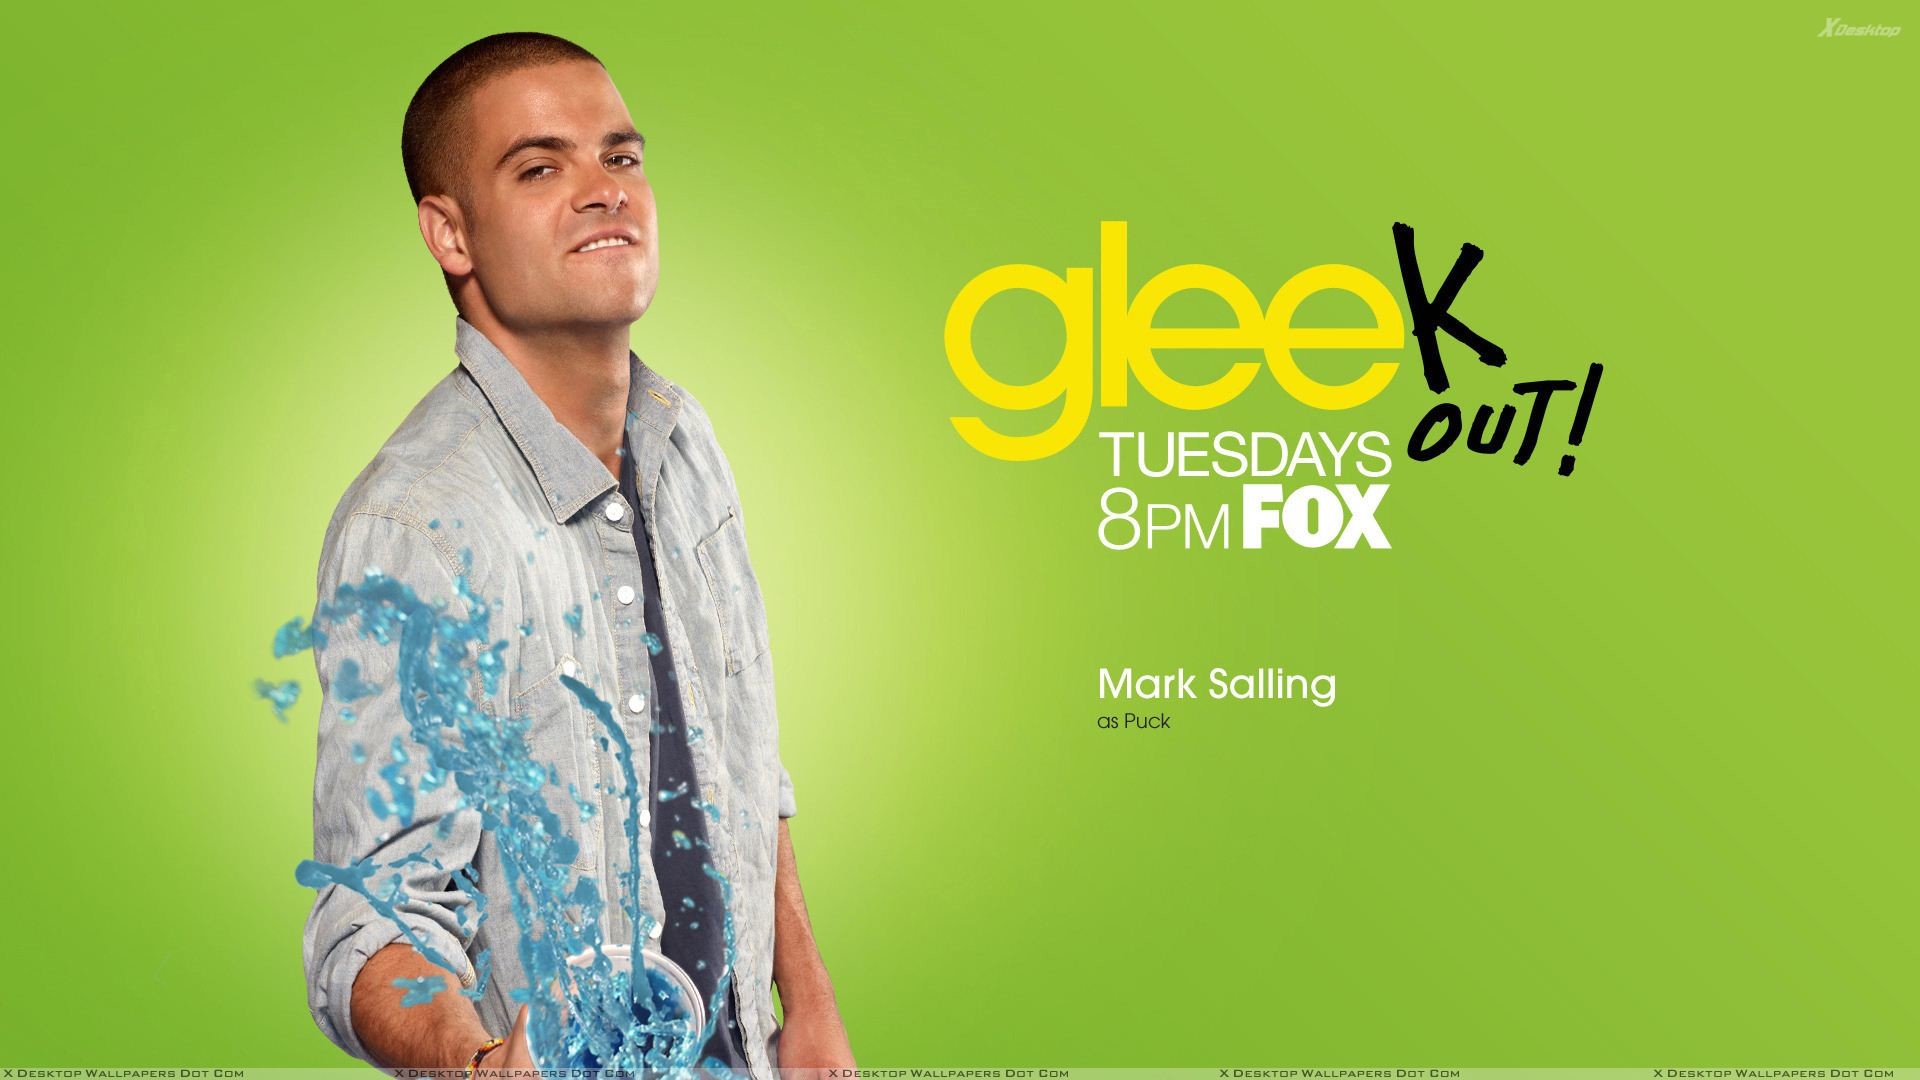 1920x1080 You are viewing wallpaper titled "Glee ...